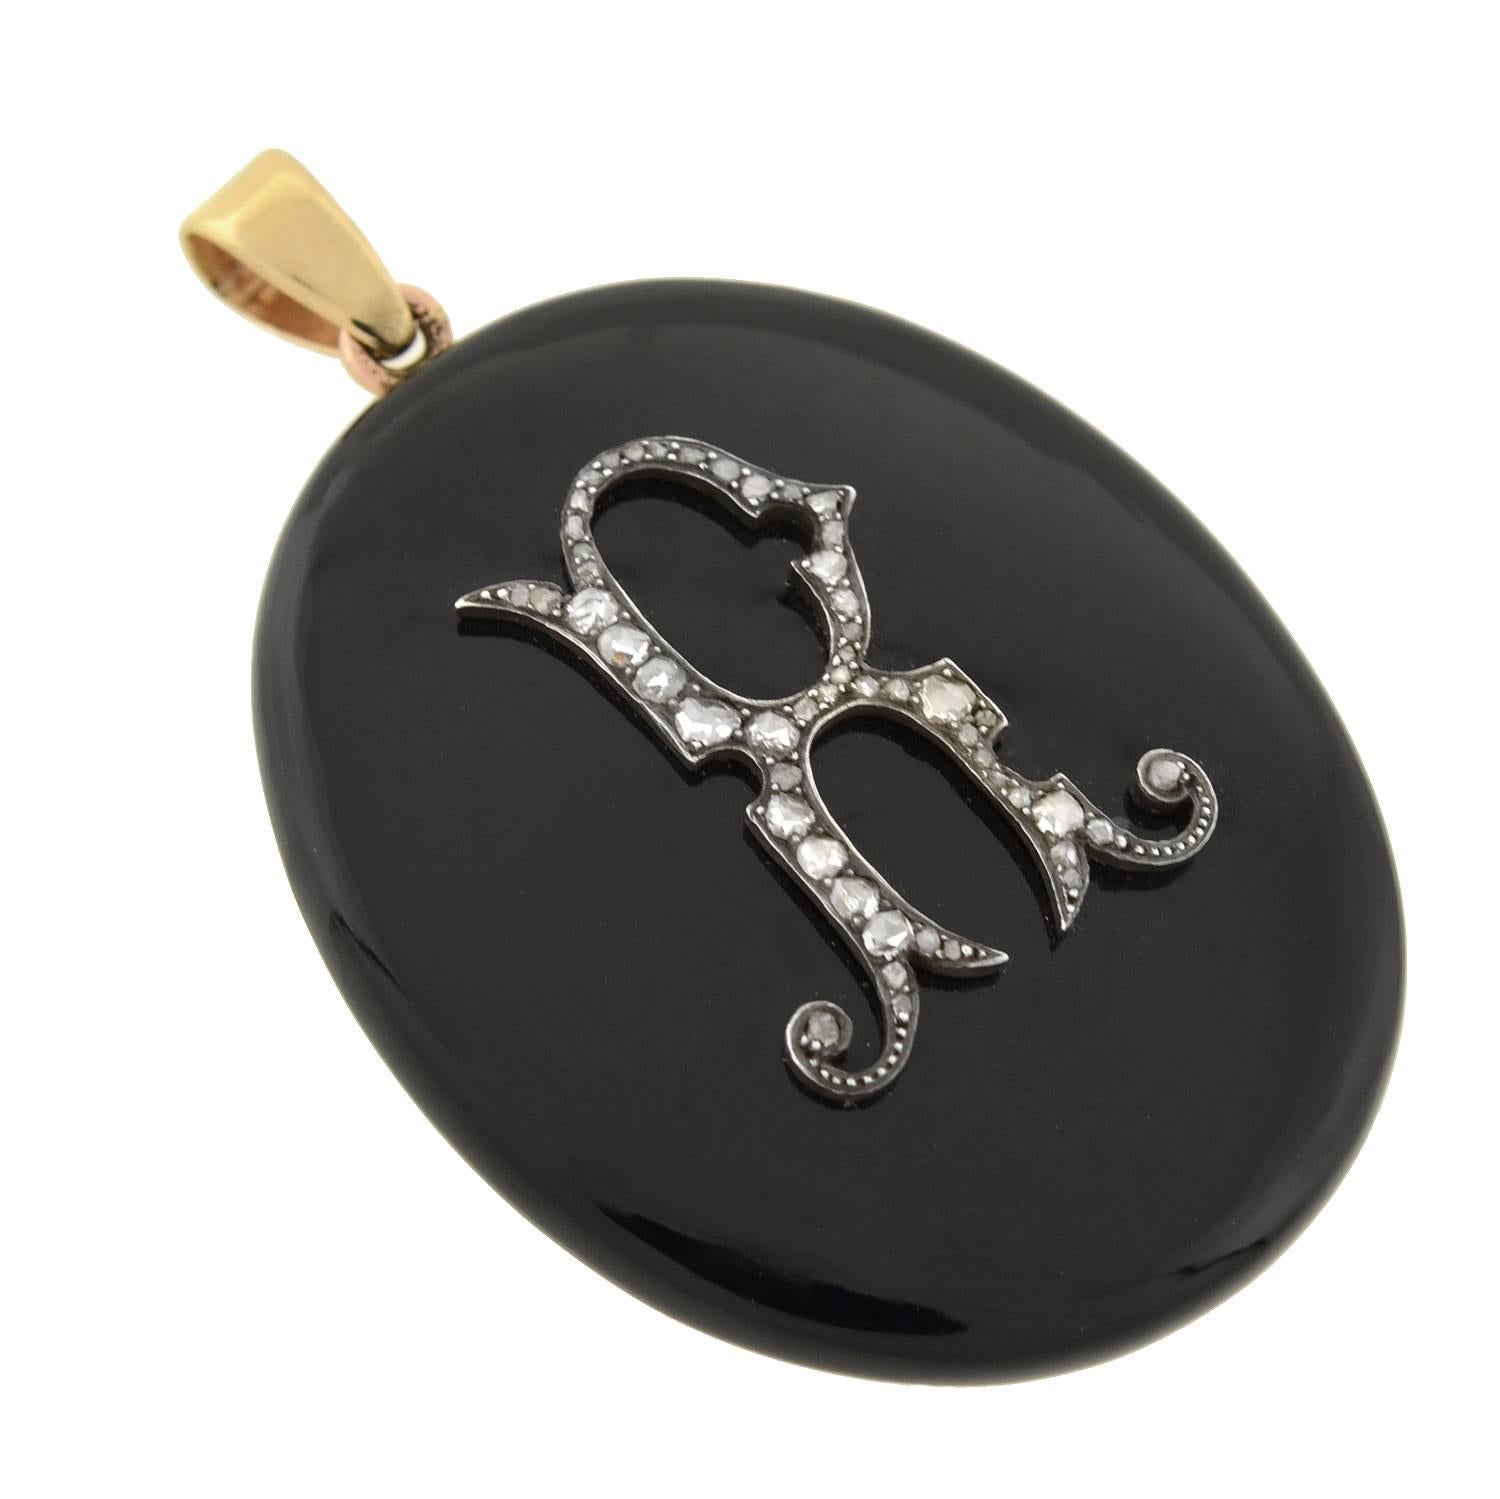 An incredible onyx and diamond locket/pendant from the Victorian (ca1880) era! This impressive piece is carved from a solid piece of onyx, and is quite substantial in size. The onyx is smoothly polished for a glossy, rich black finish. Adorning the